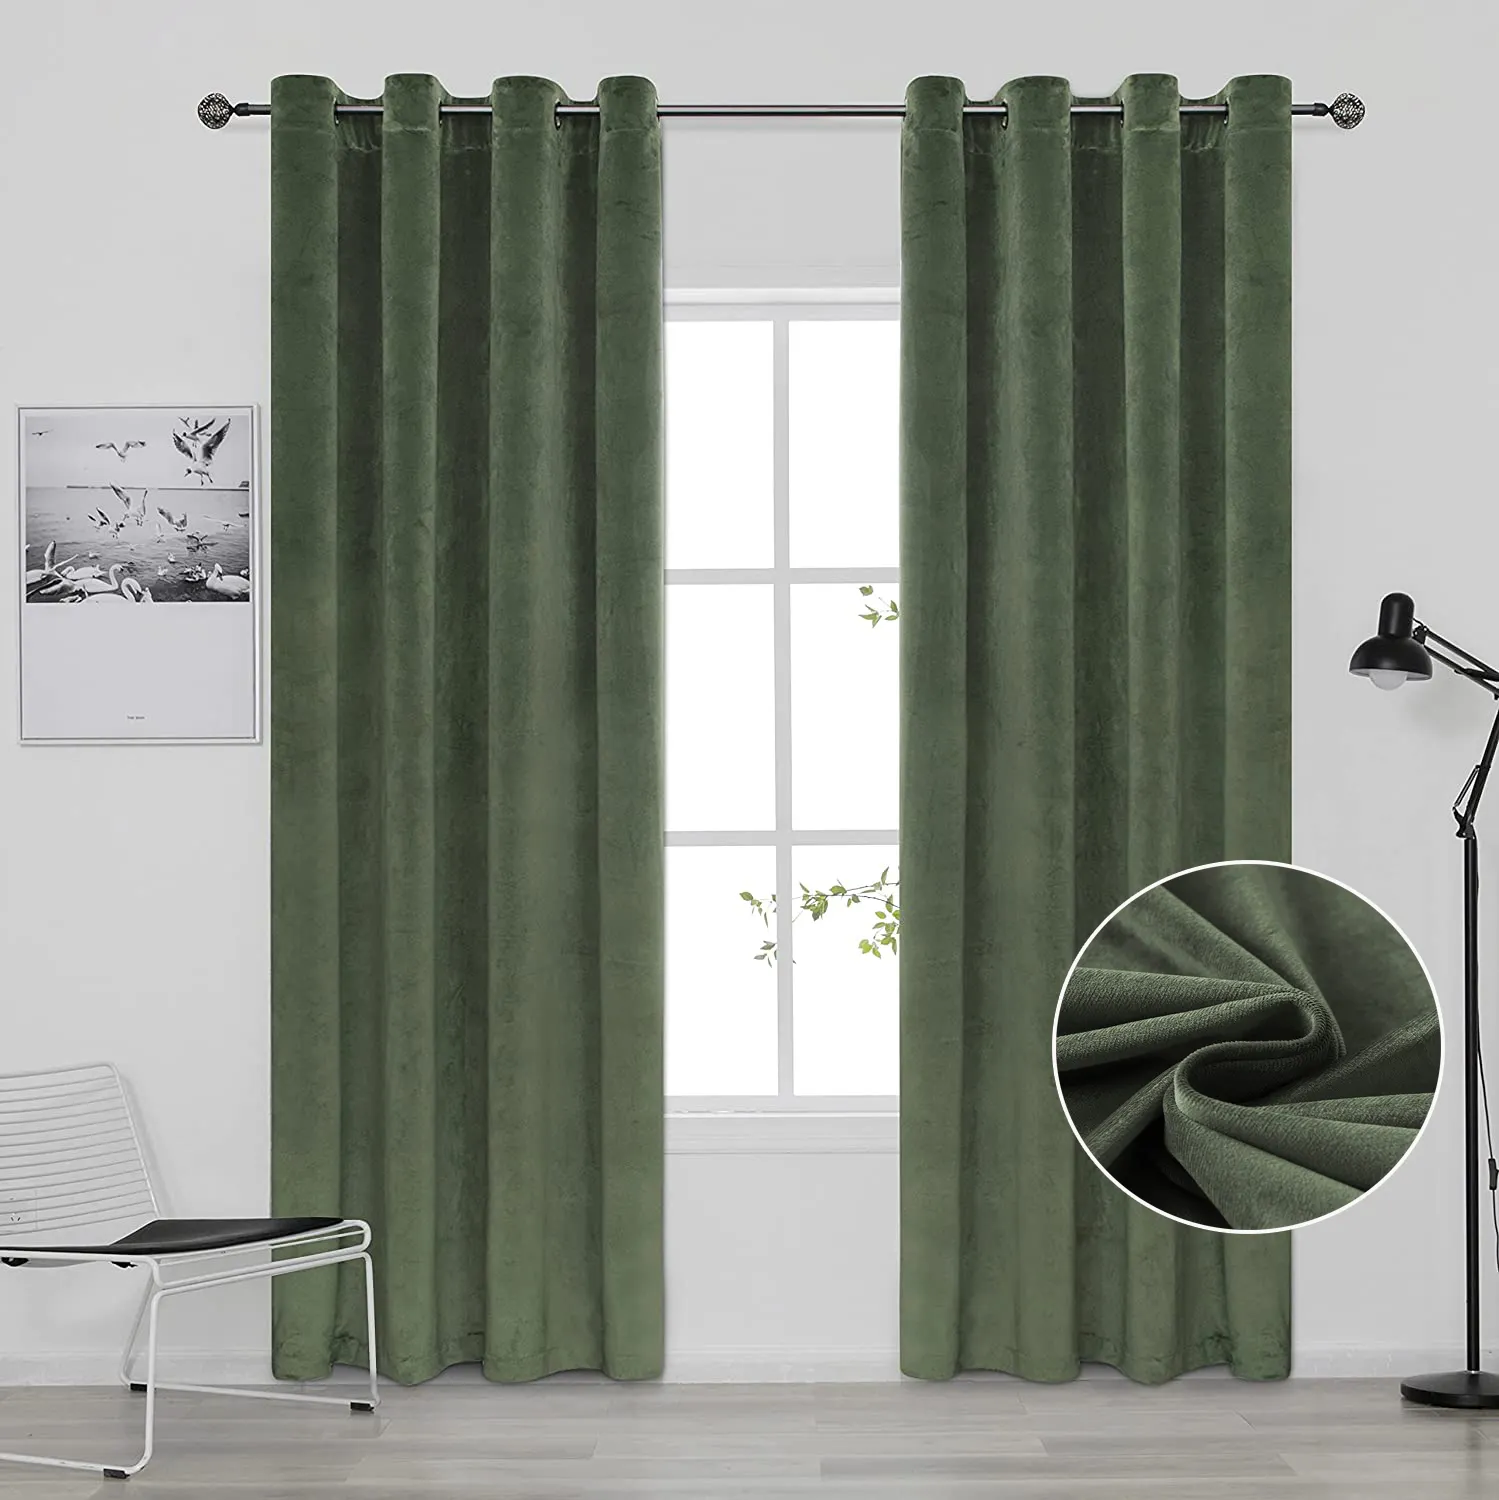 Living Room Curtains Blackout Wholesale Crushed Velvet Emerald Velour Blackout Windows Curtains Green For The Living Room Bedroom Ready Made